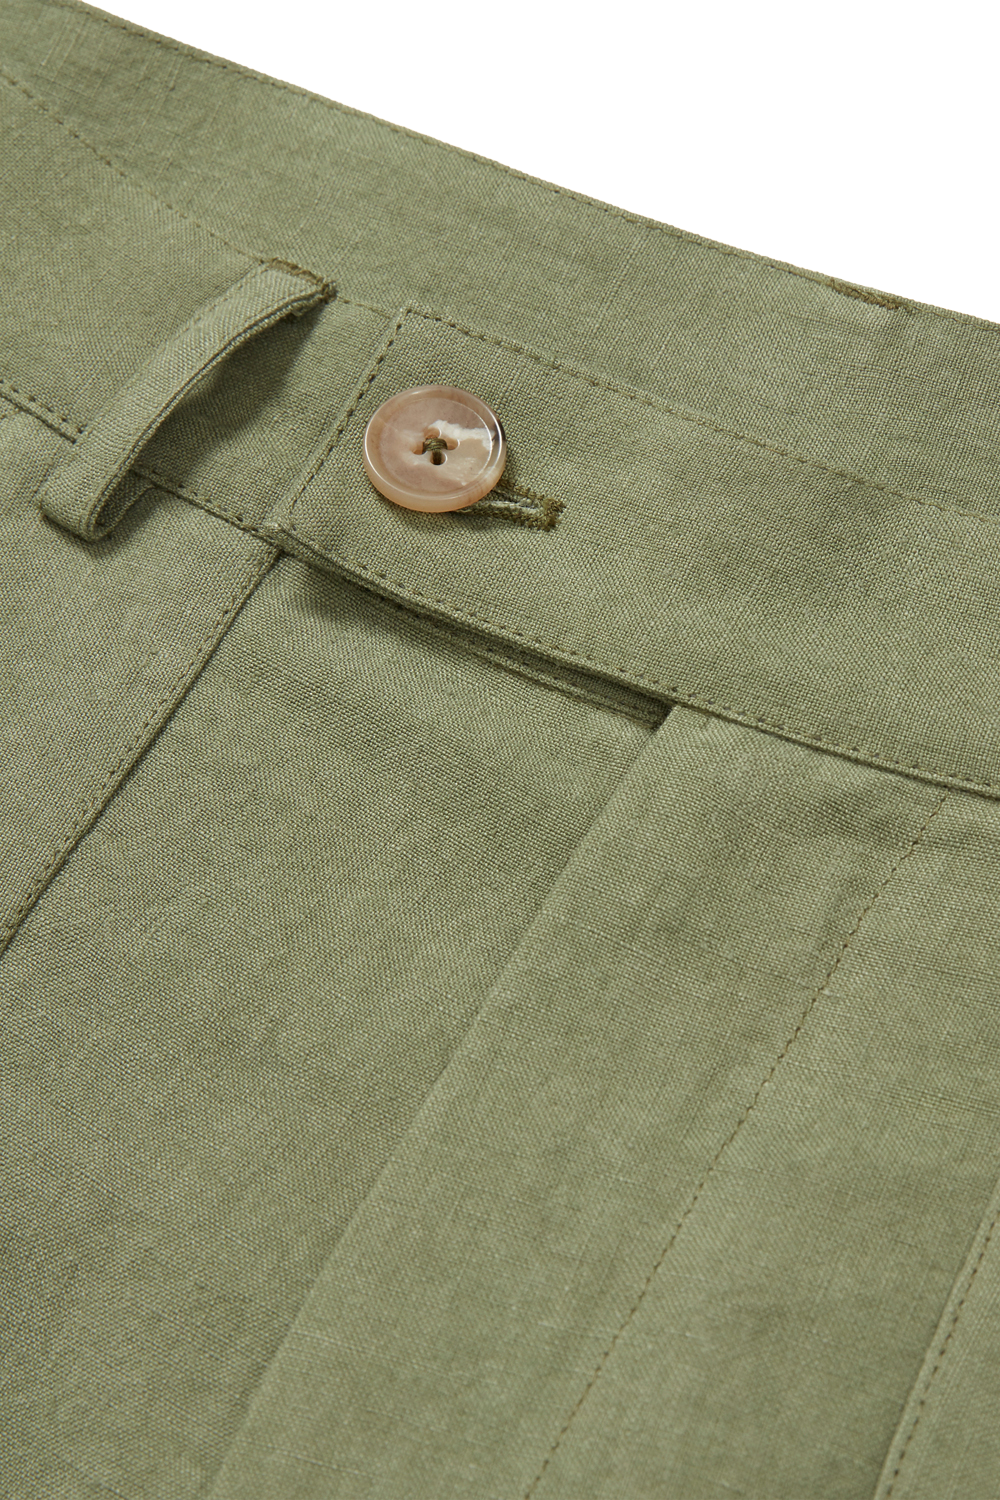 Patch Pocket Shorts 9 inch Sage Green